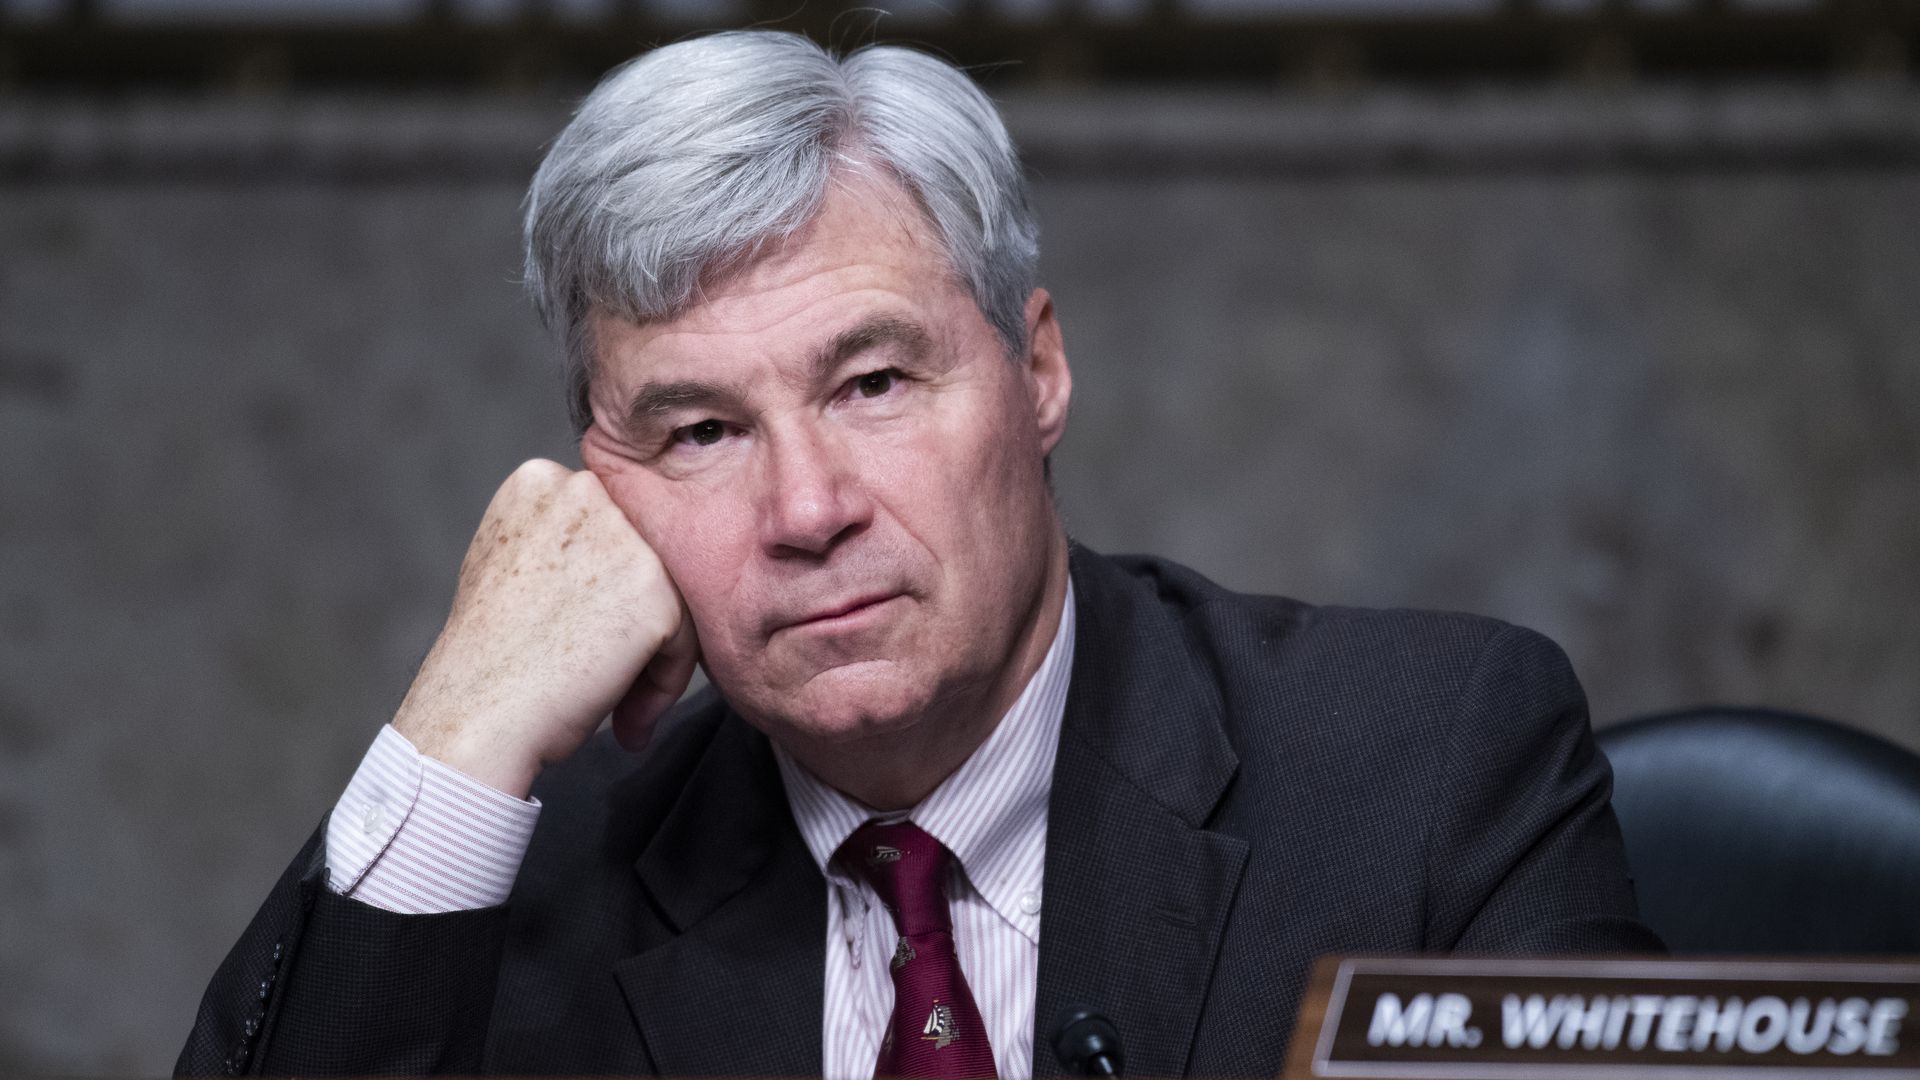  Senator Sheldon Whitehouse, a Democrat from Rhode Island, listens during a Senate Judiciary Committee confirmation hearing in Washington, D.C., U.S., on Wednesday, April 28, 2021. 